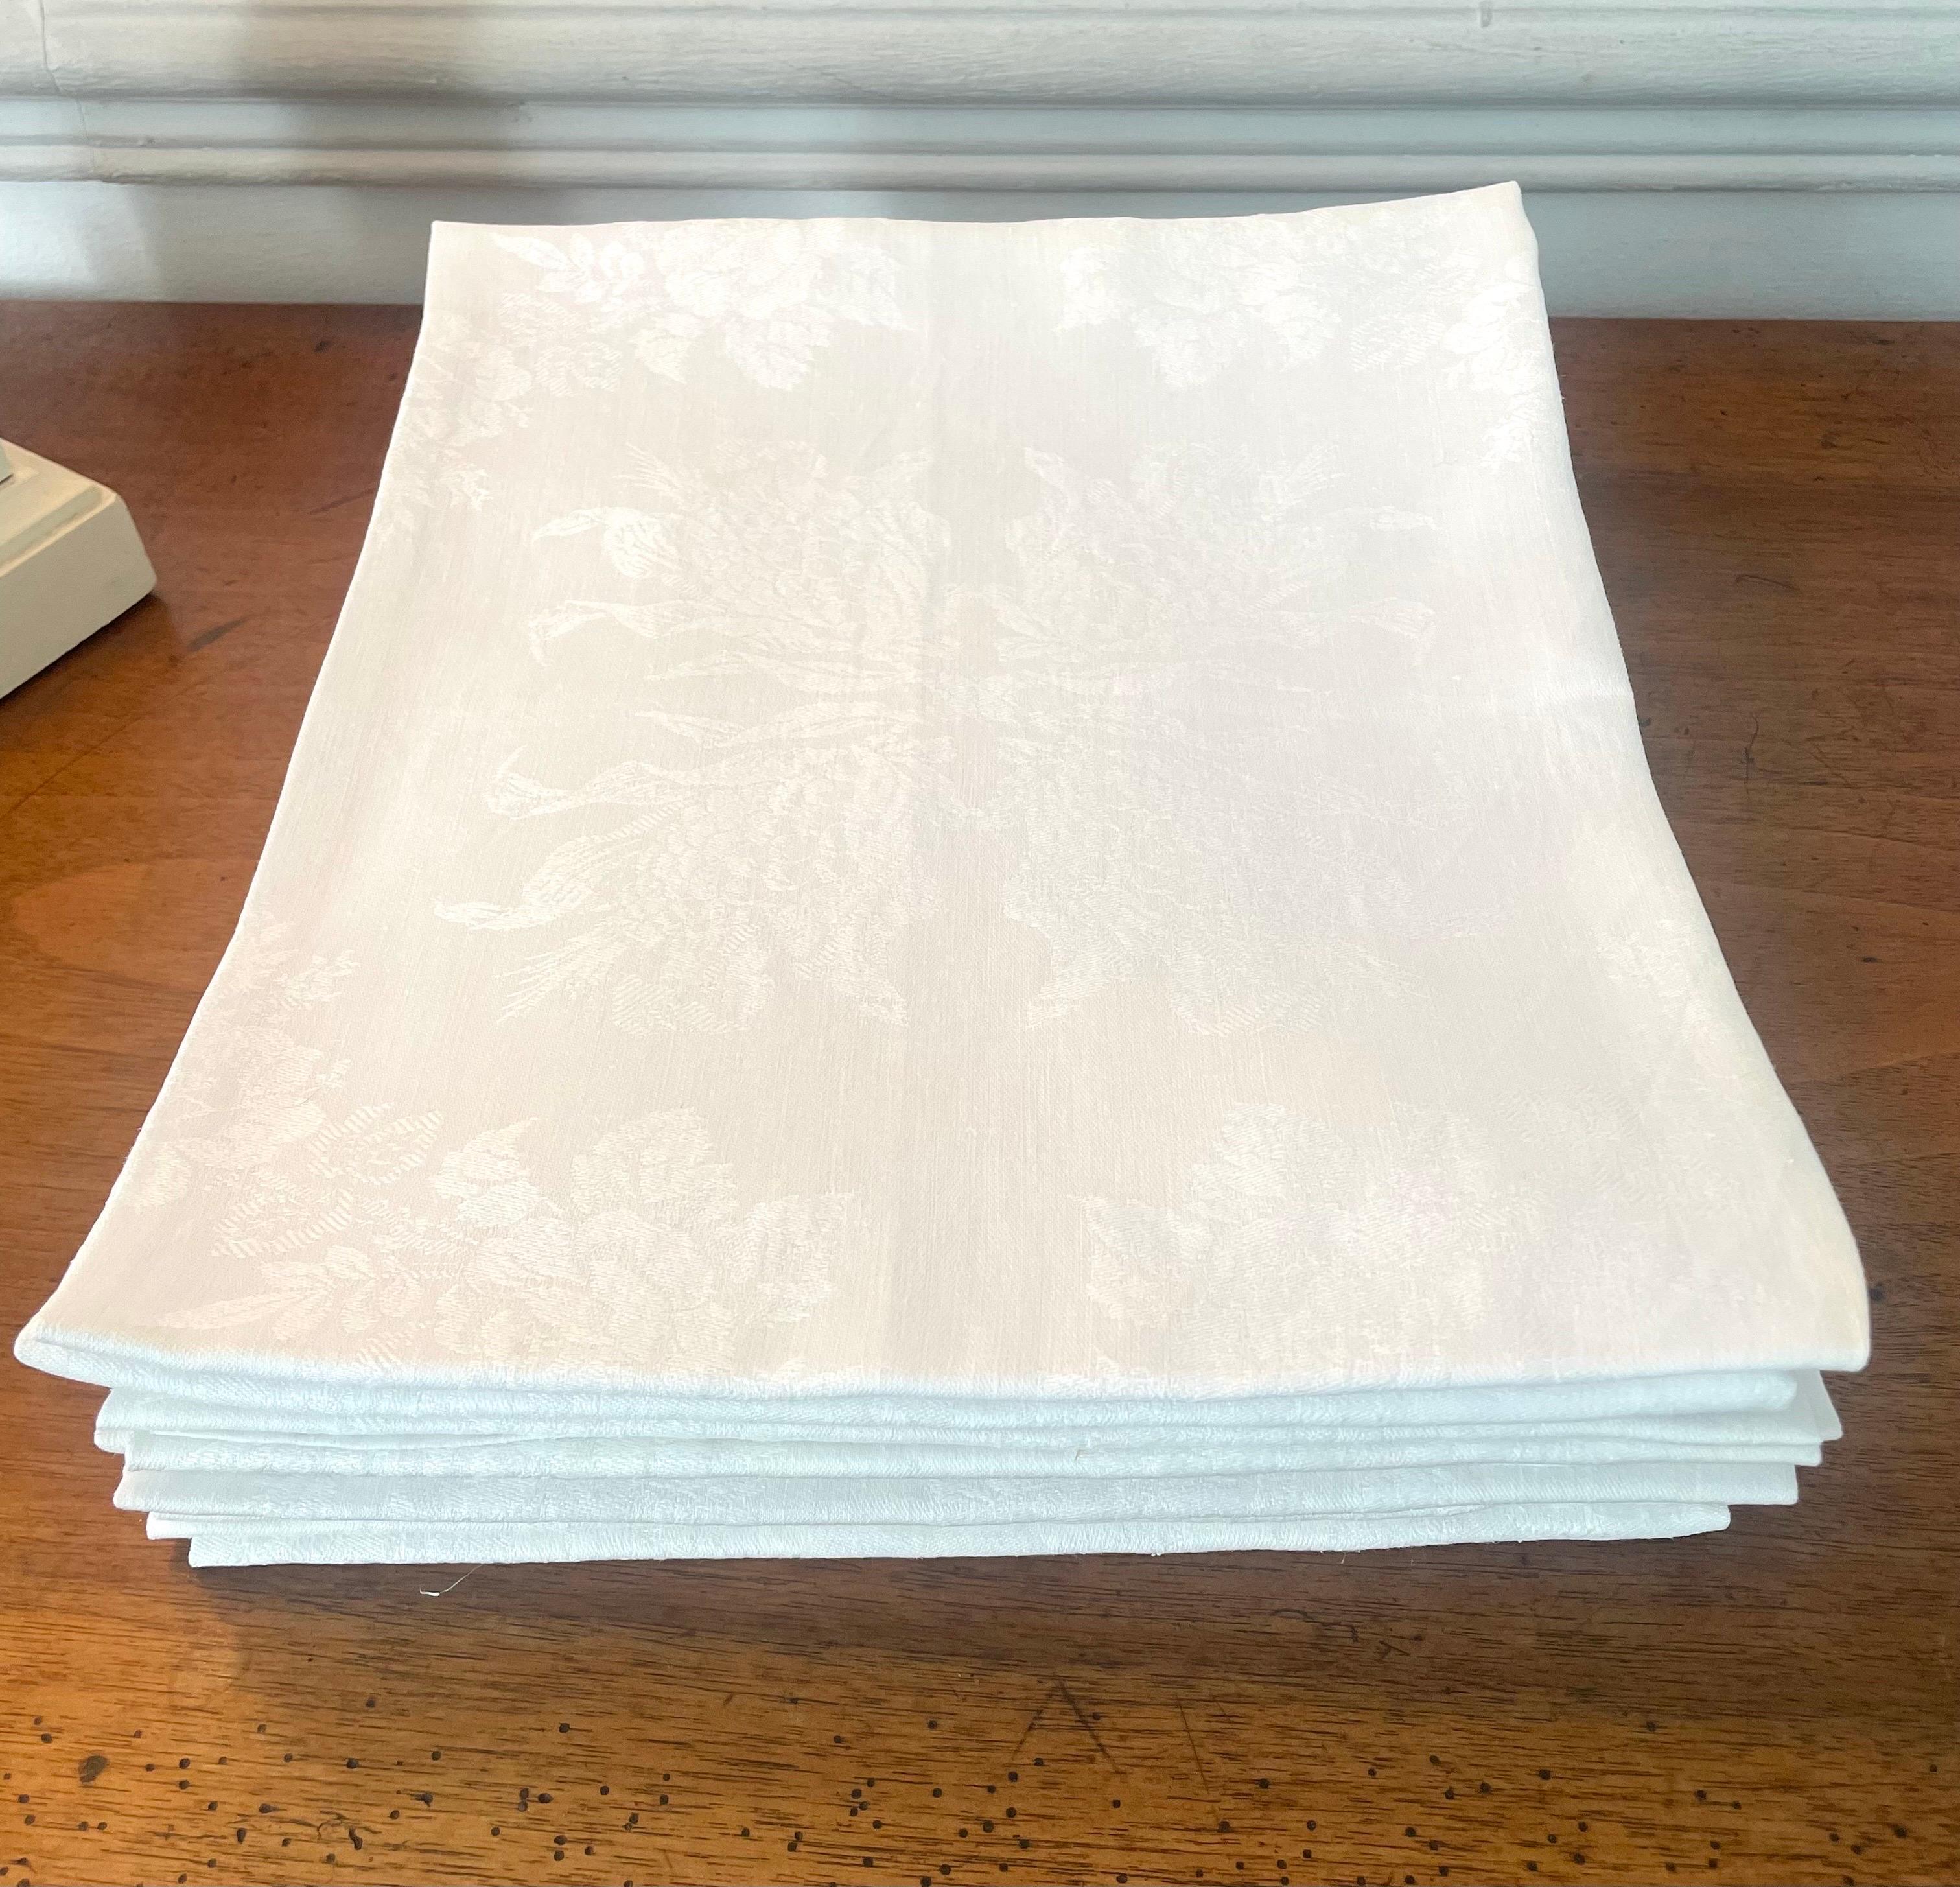 Very nice set of old linen from the beginning of the 20th century including 24 matching napkins.
The napkins are very elegant and refined.
Beautiful set of 24 napkins all in damask linen from the 1900s.
French manual work
Magnificent linen yarn